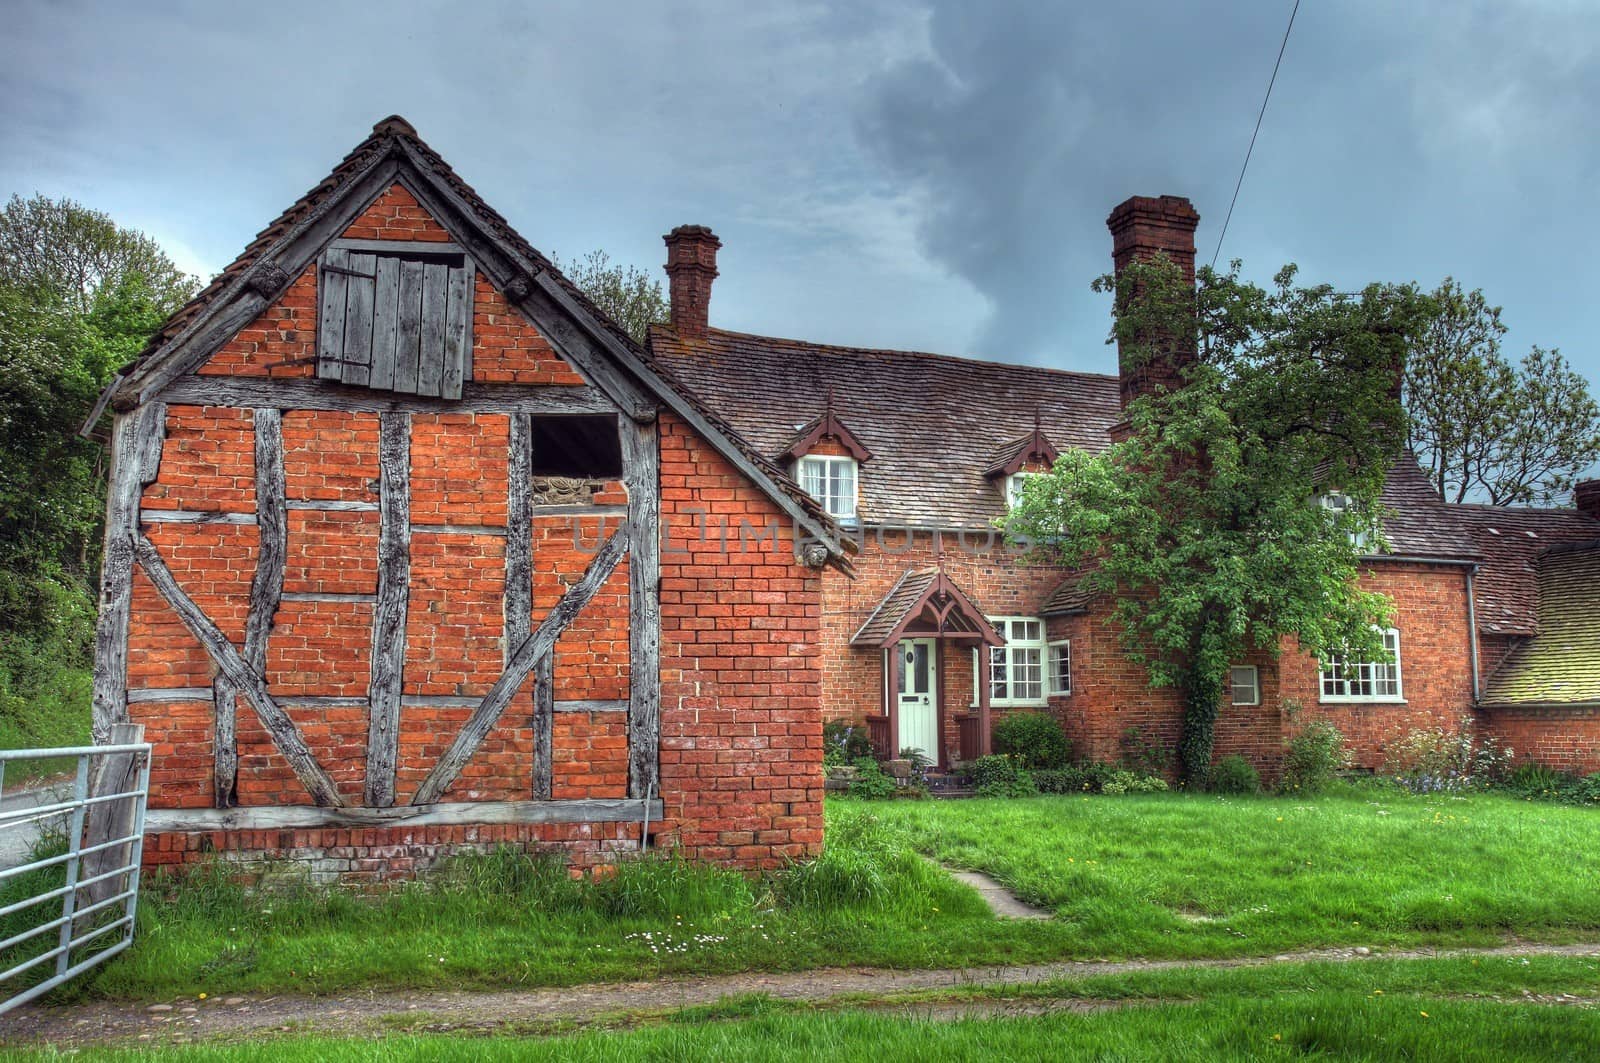 Worcestershire farmhouse by andrewroland